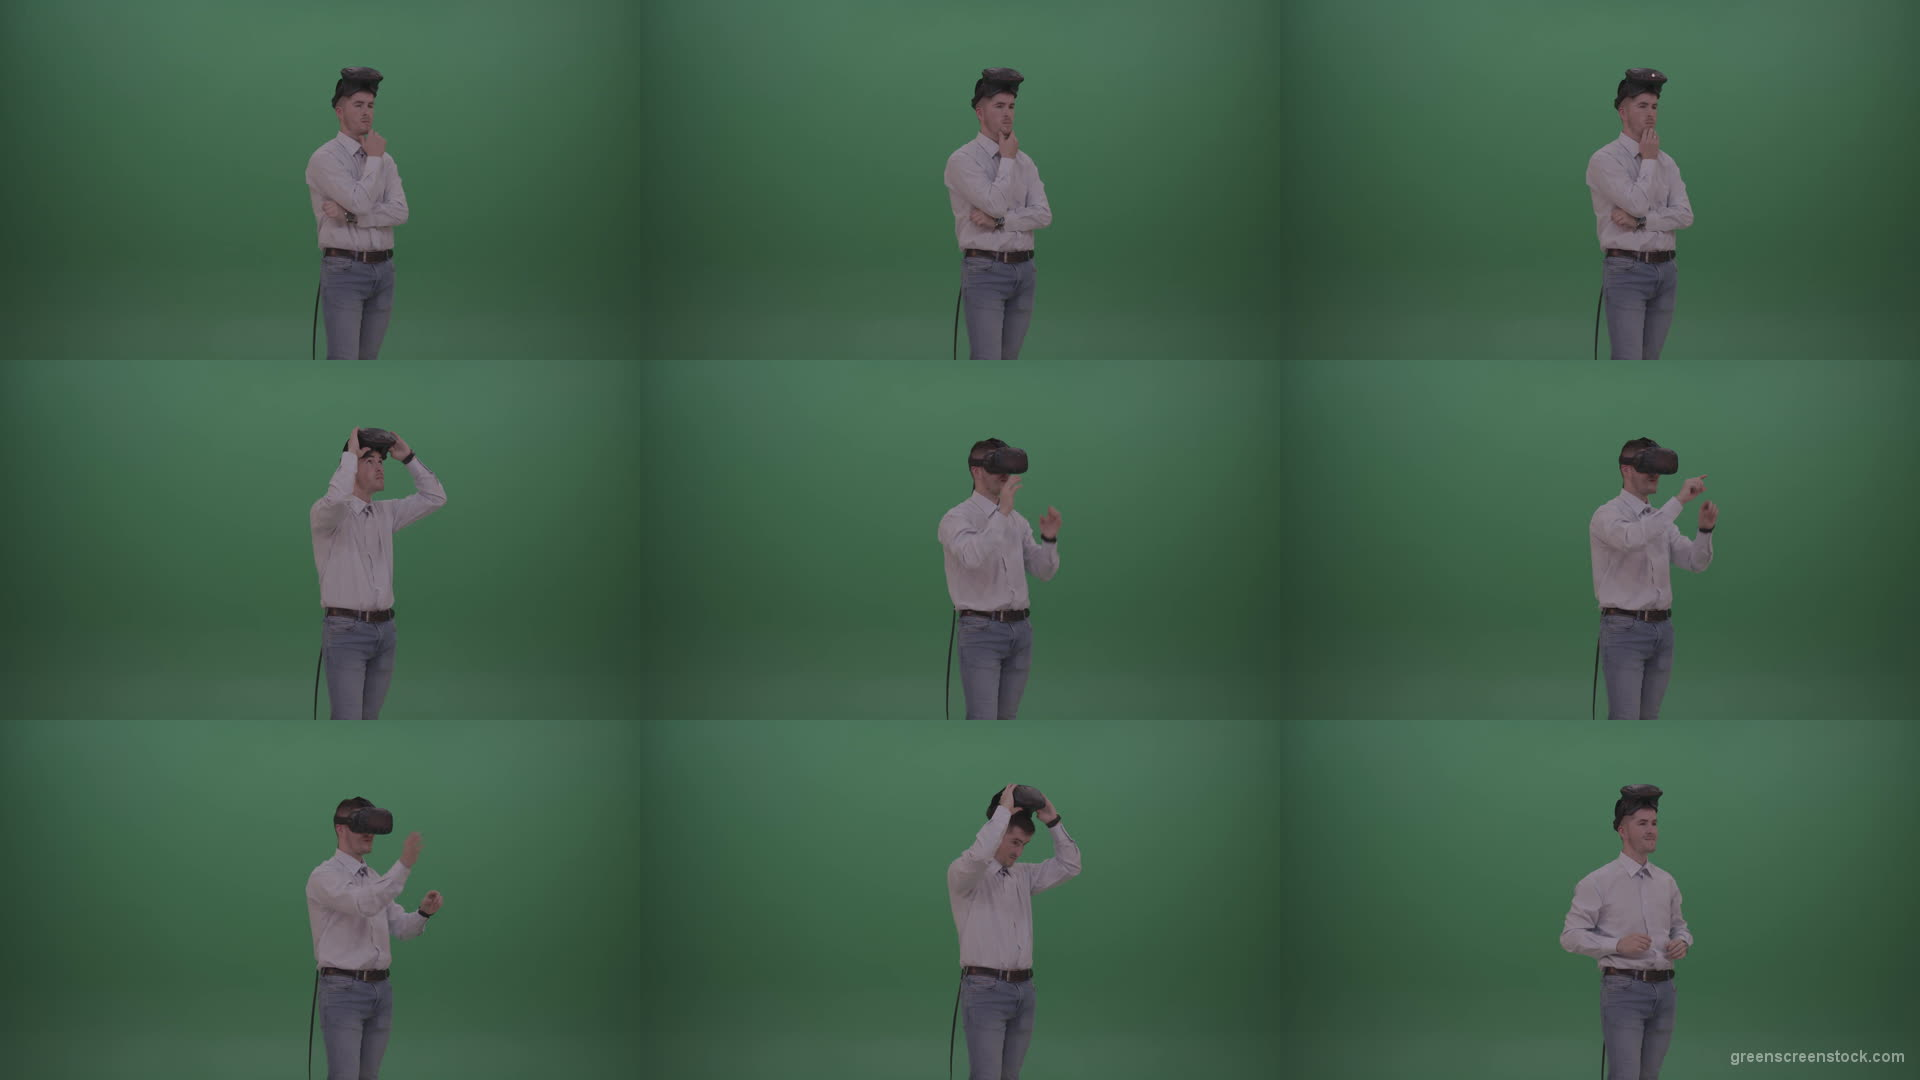 Young_Man_Wearing_White_Shirt_Making_Hard_Decision_Using_Virtual_Glasses_To_Solve_The_Task_Green_Screen_Wall_Chroma_Key_Background-1920 Green Screen Stock